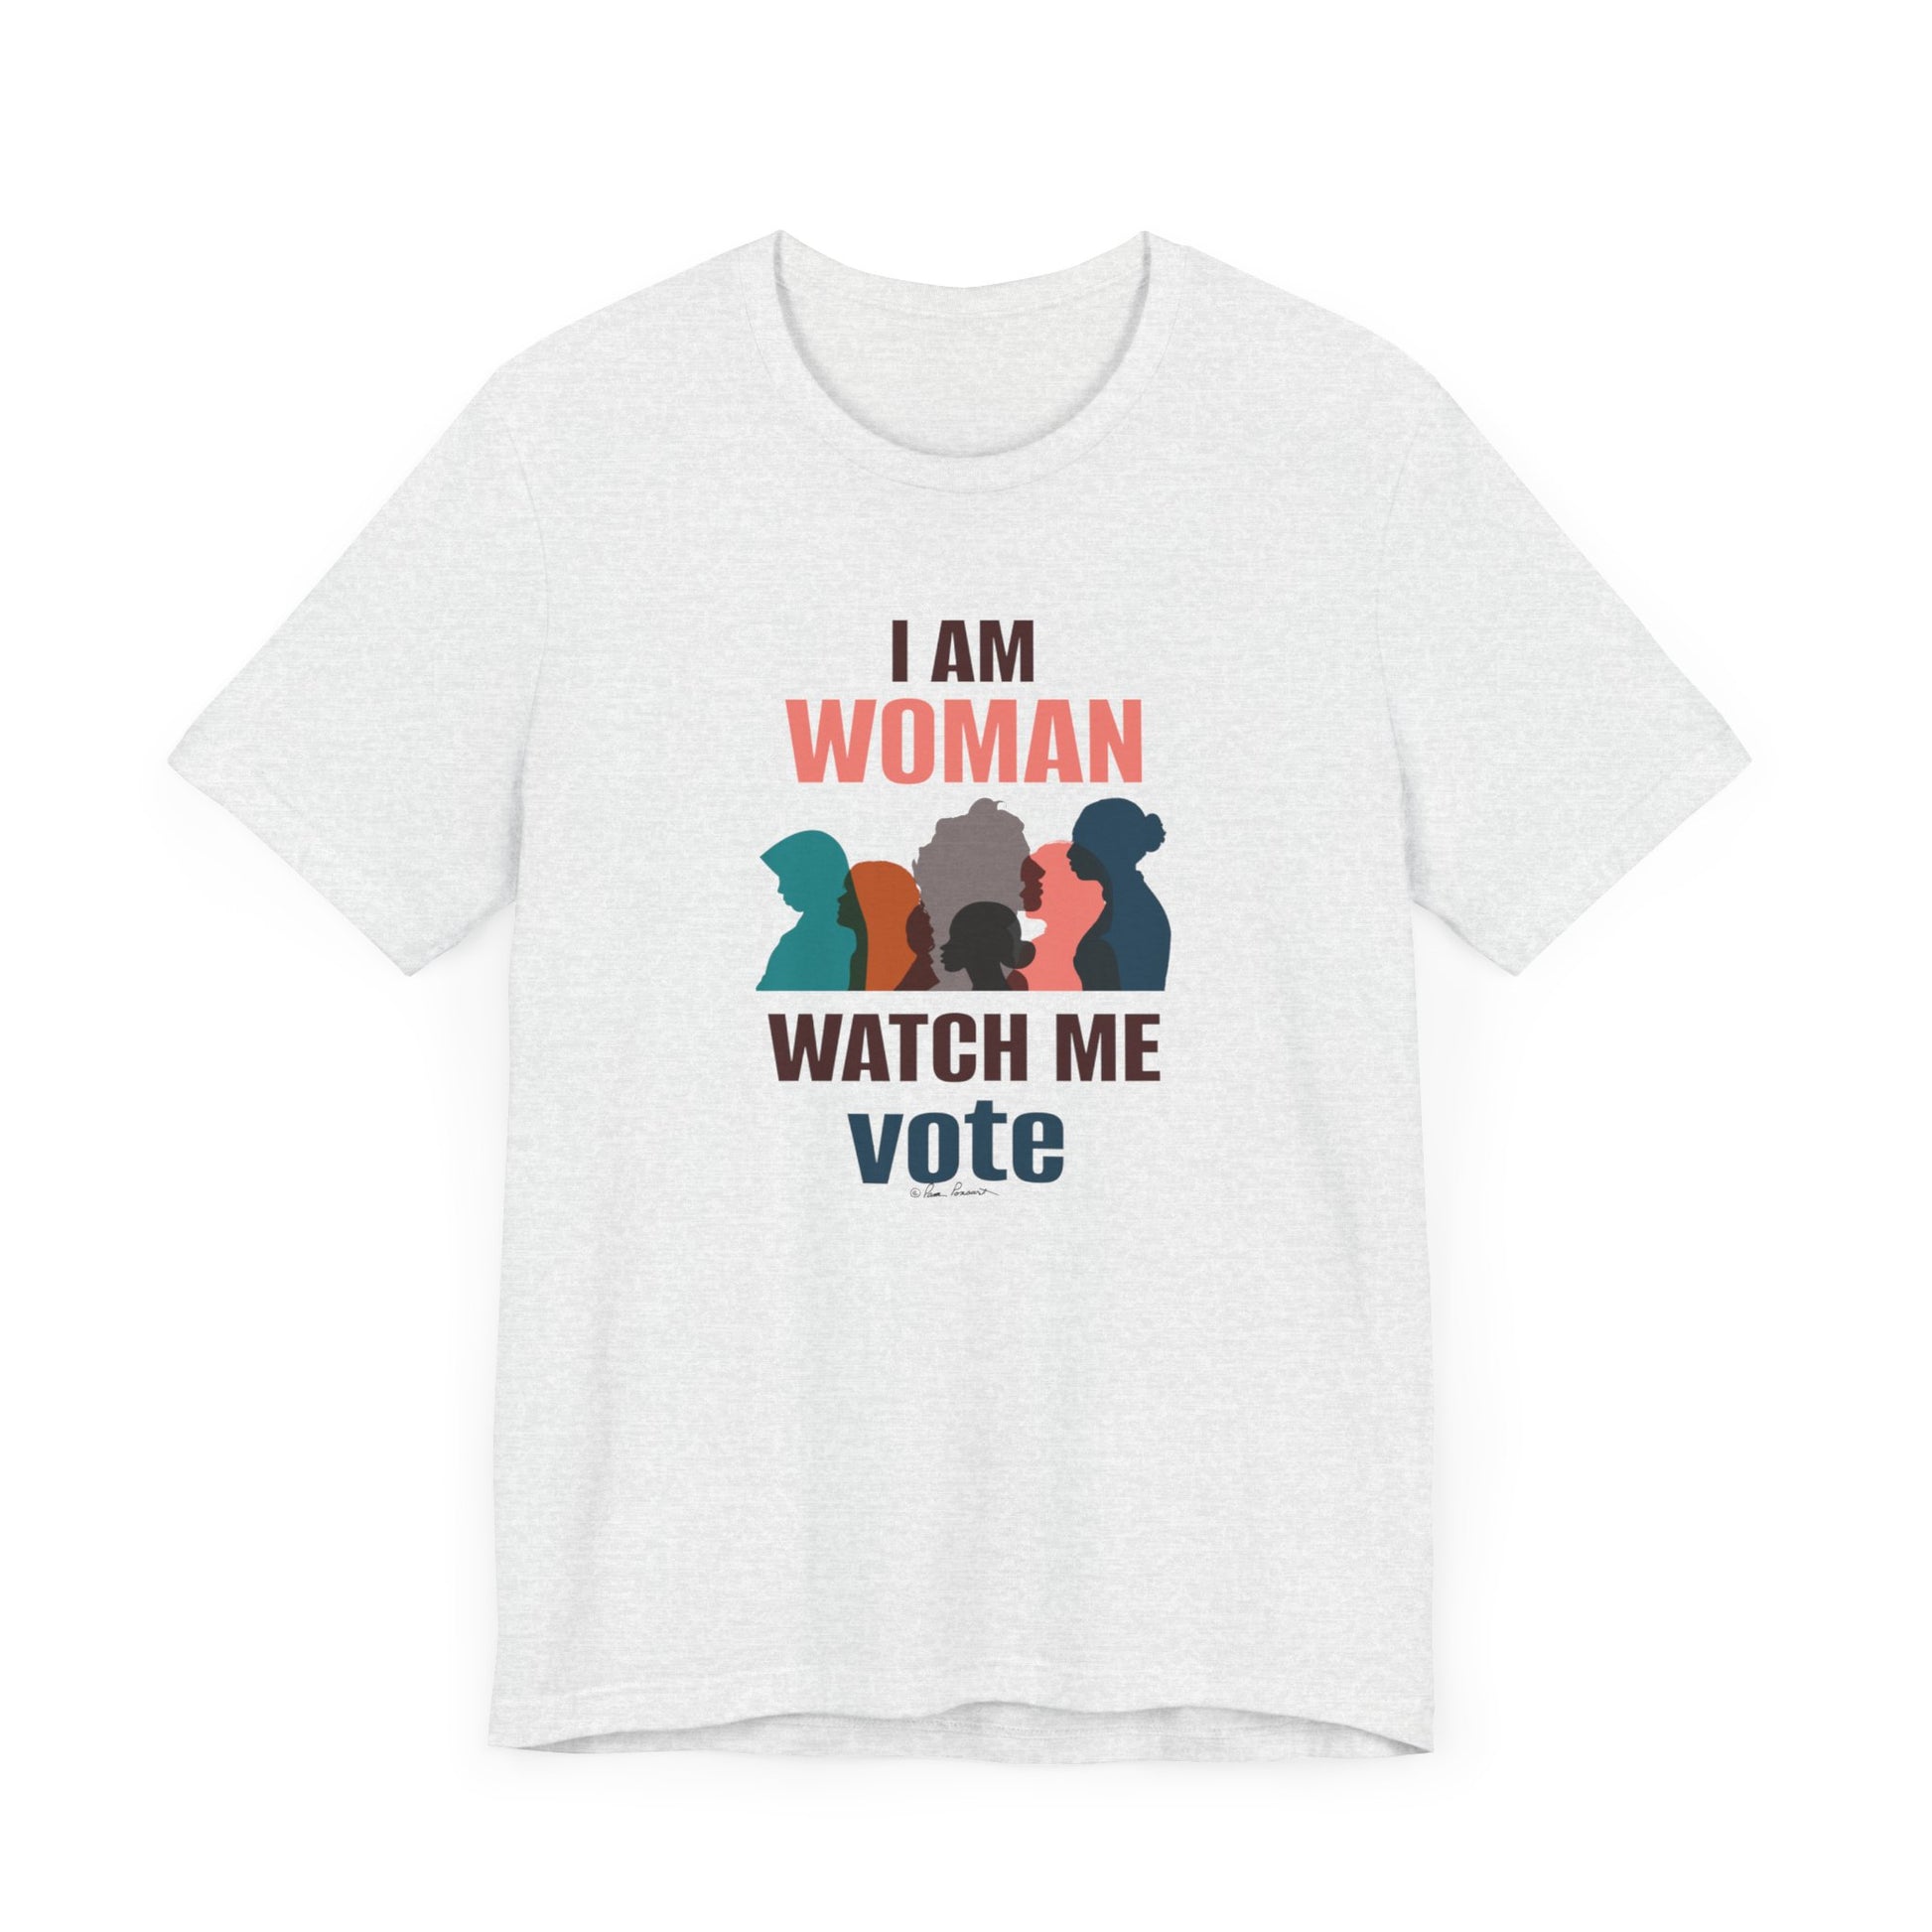 A white Printify t-shirt with the phrase "i am woman watch me vote" in red and black letters, featuring silhouettes of four women in teal, purple, orange, and blue.